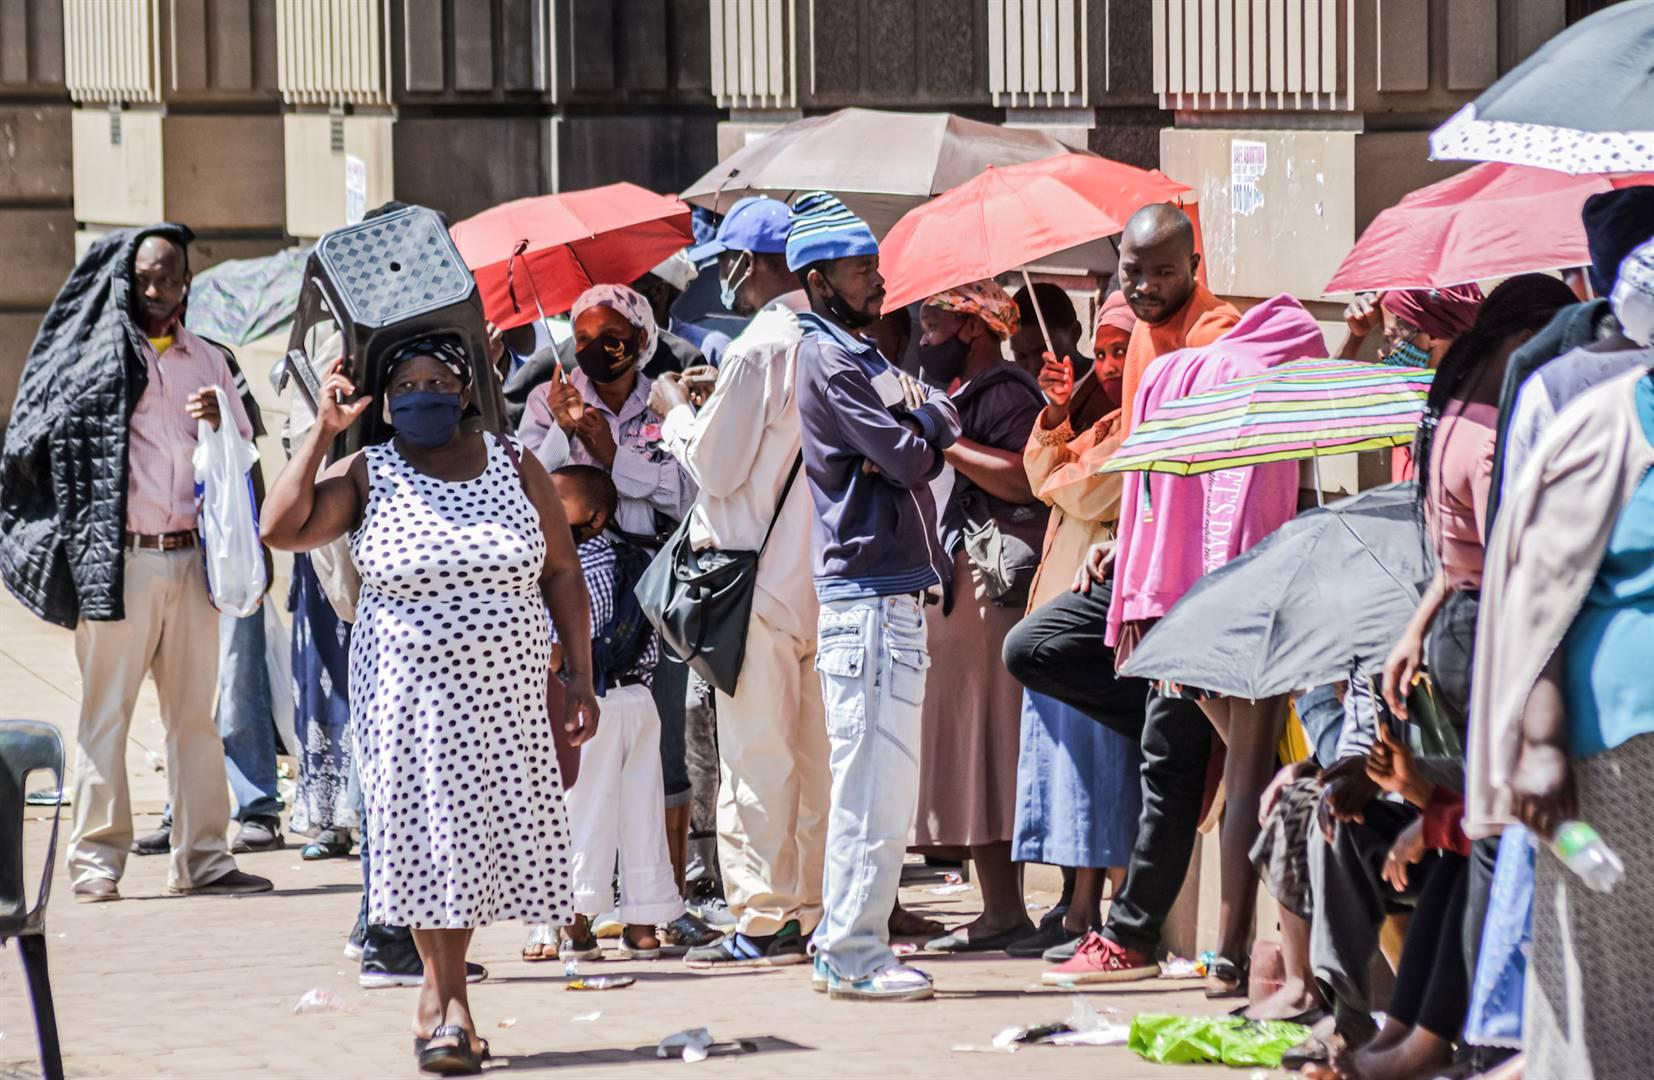 Post Office stops distributing R350 grants, supermarkets step in